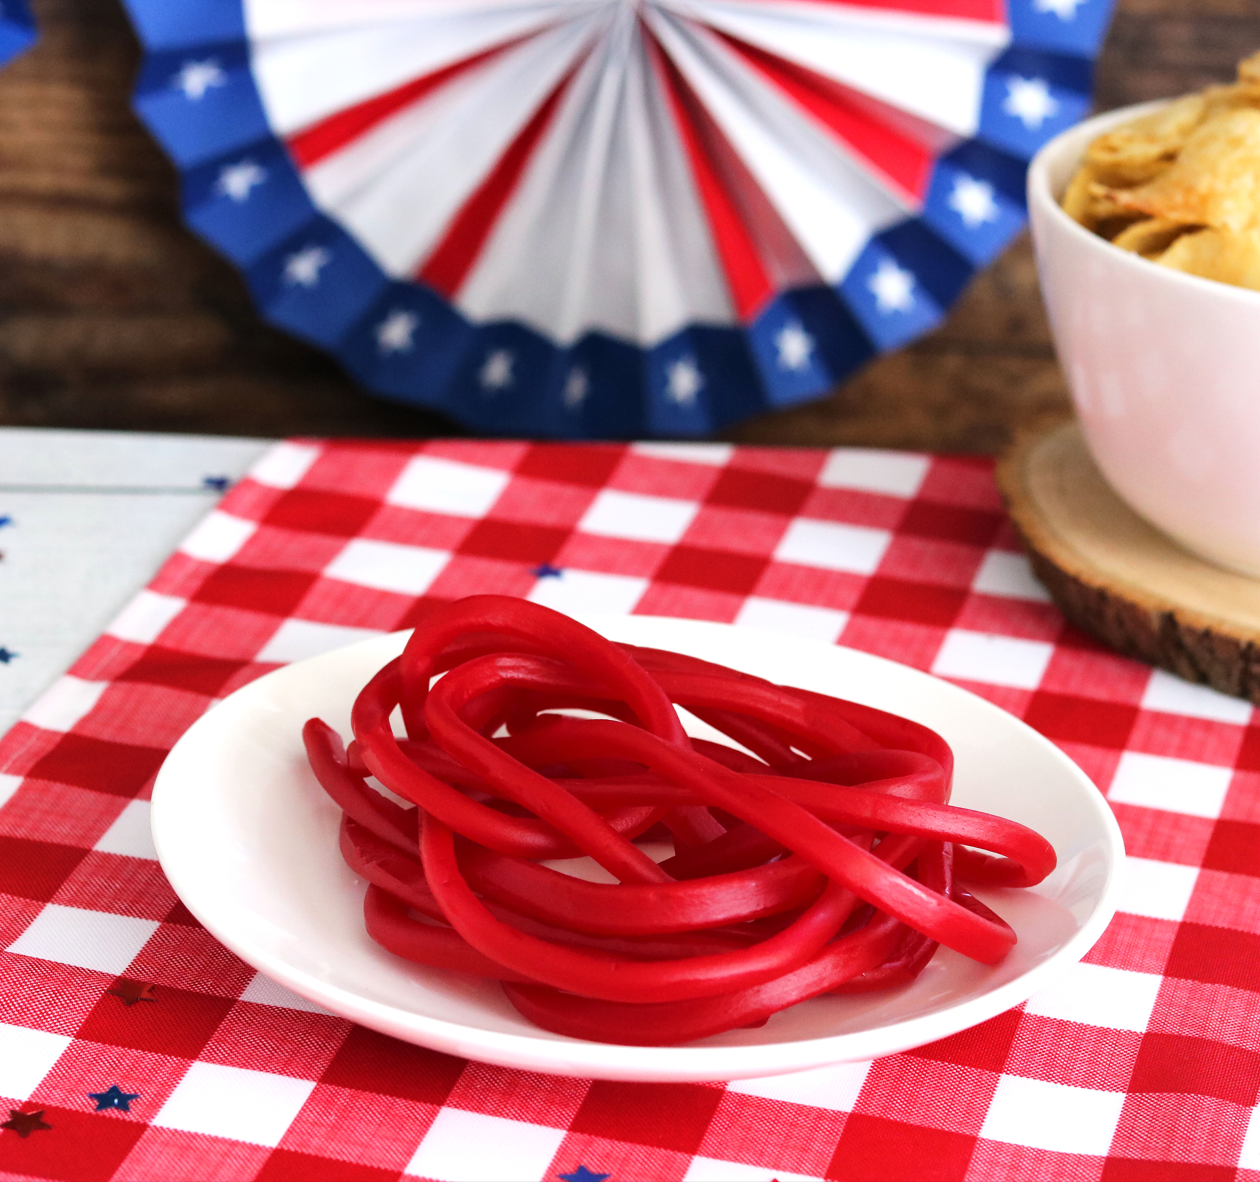 Super Ropes Red Licorice Rope Candy on a picnic table with other snacks and patriotic decorations